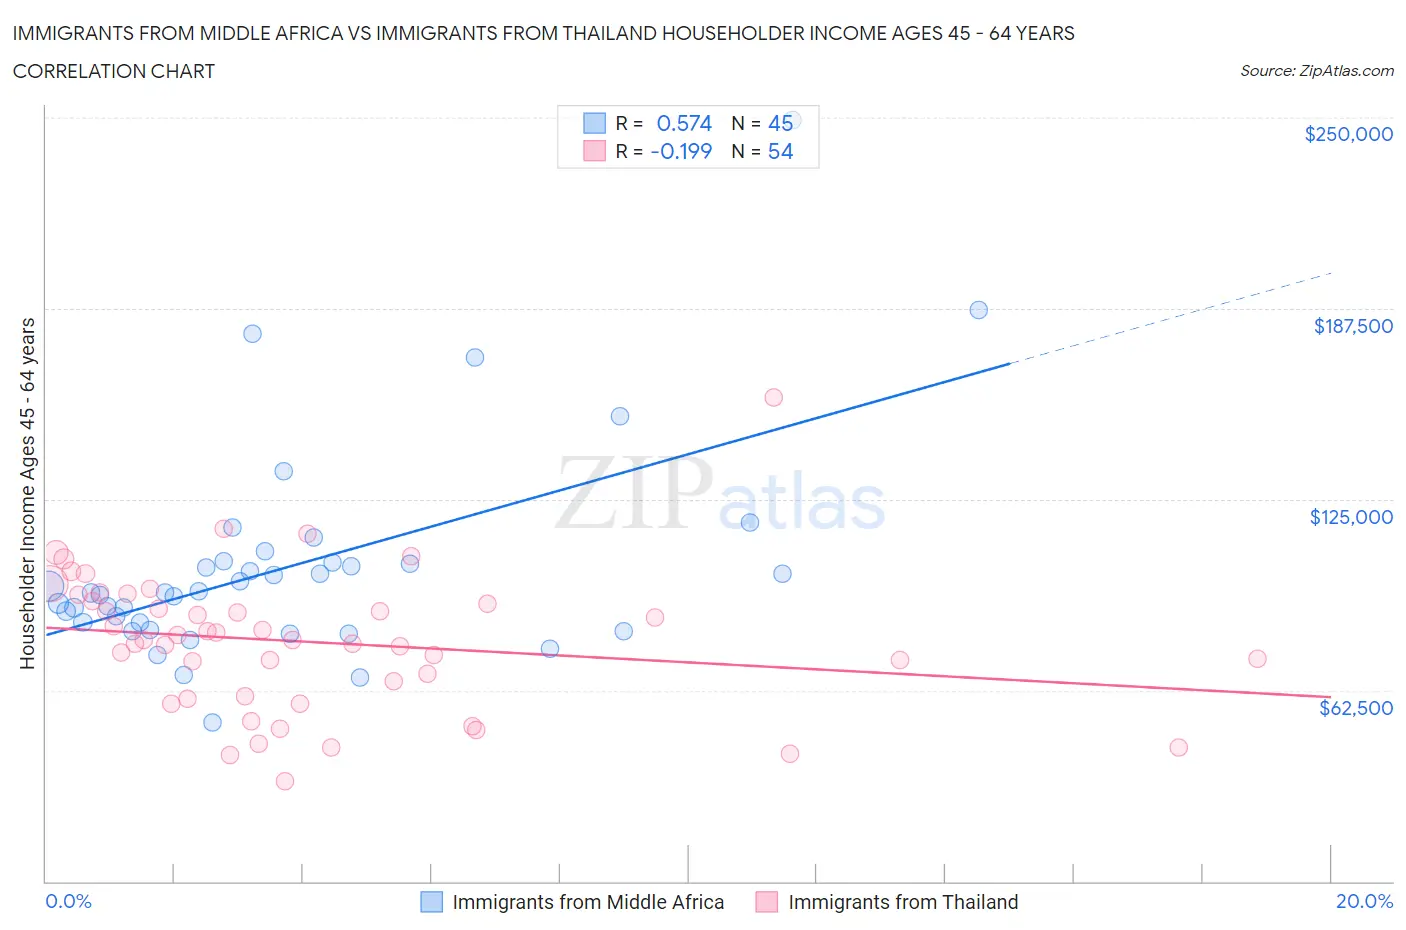 Immigrants from Middle Africa vs Immigrants from Thailand Householder Income Ages 45 - 64 years